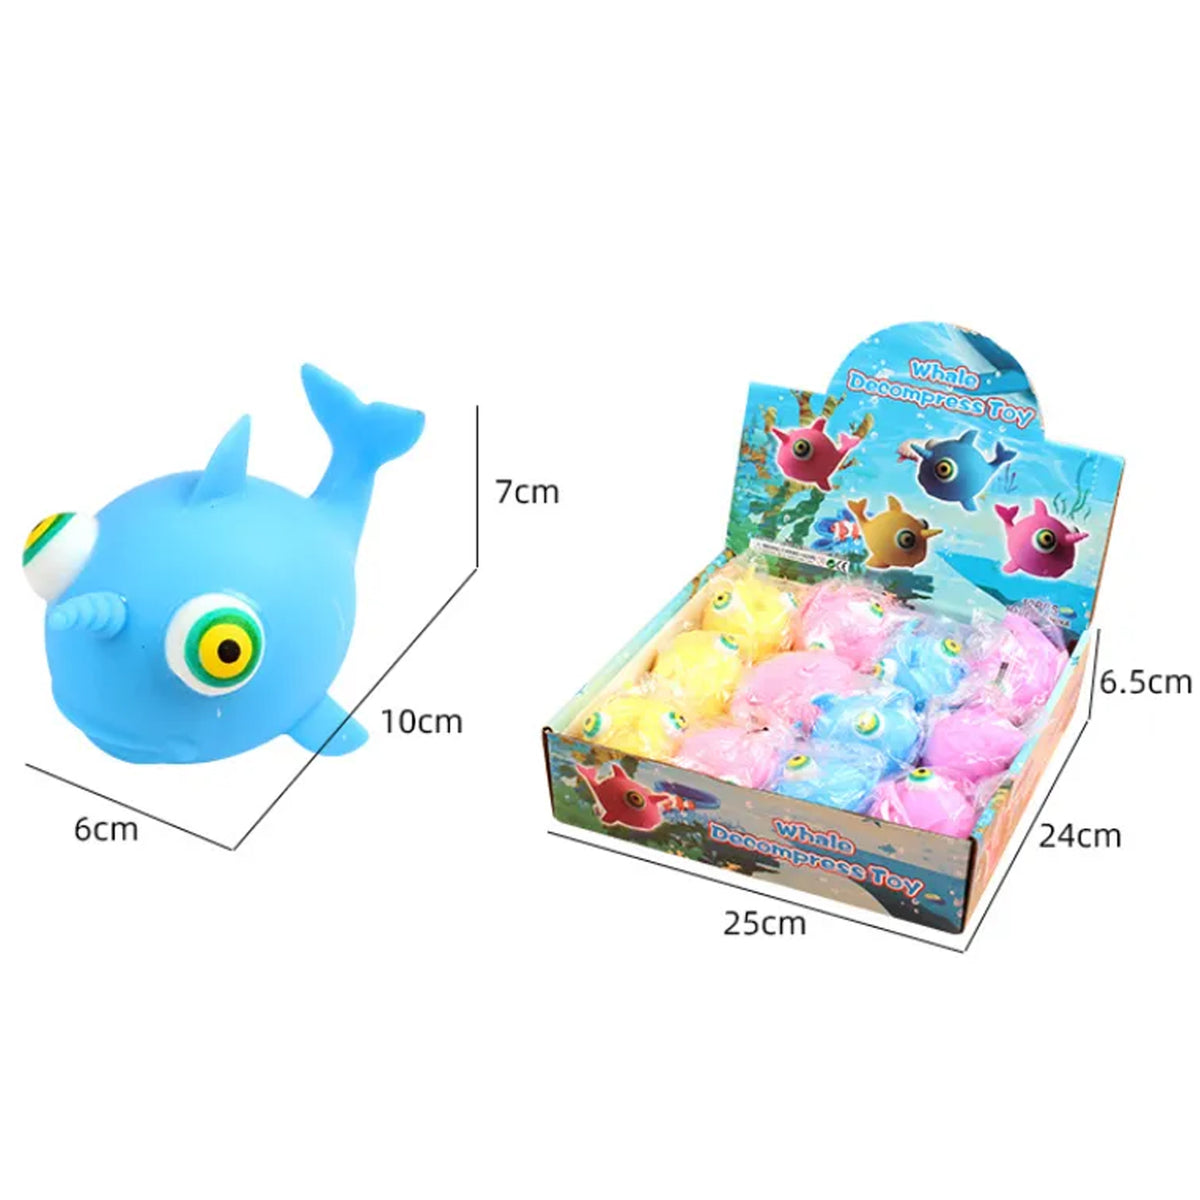 4 Hot Selling Tpr Non-toxic Toys Educational Stress Relief Toys